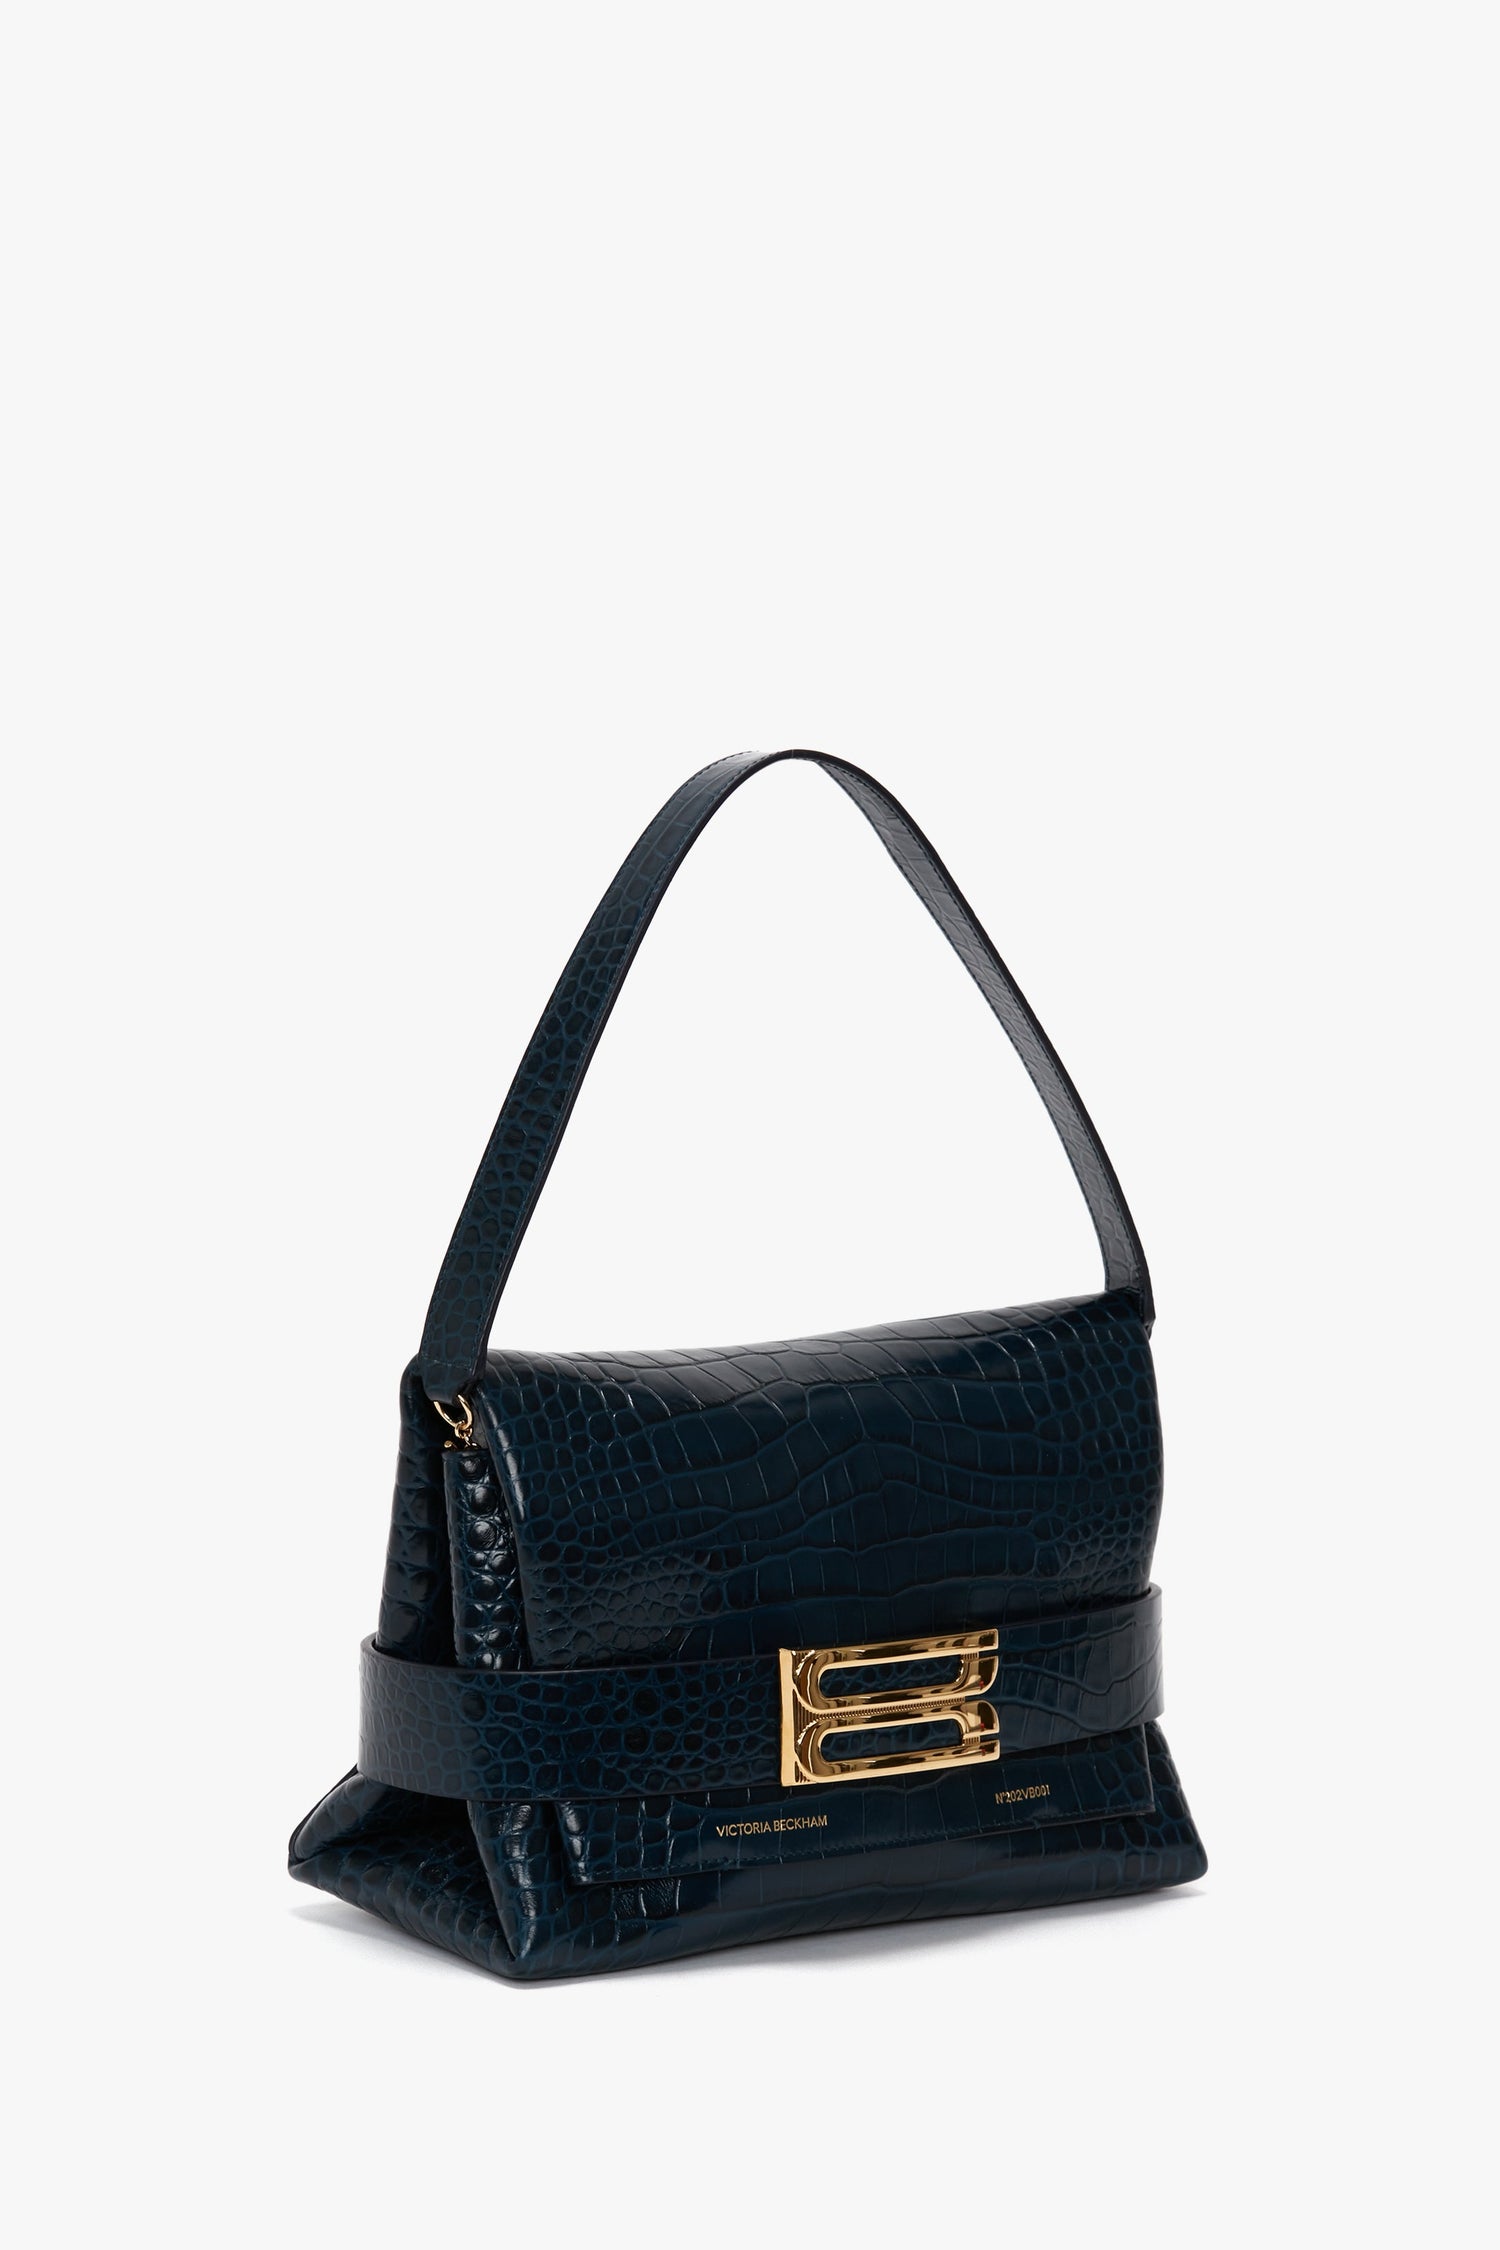 A B Pouch Bag In Croc Effect Midnight Blue Leather by Victoria Beckham, crafted from calf leather, featuring a single strap and a gold clasp closure.